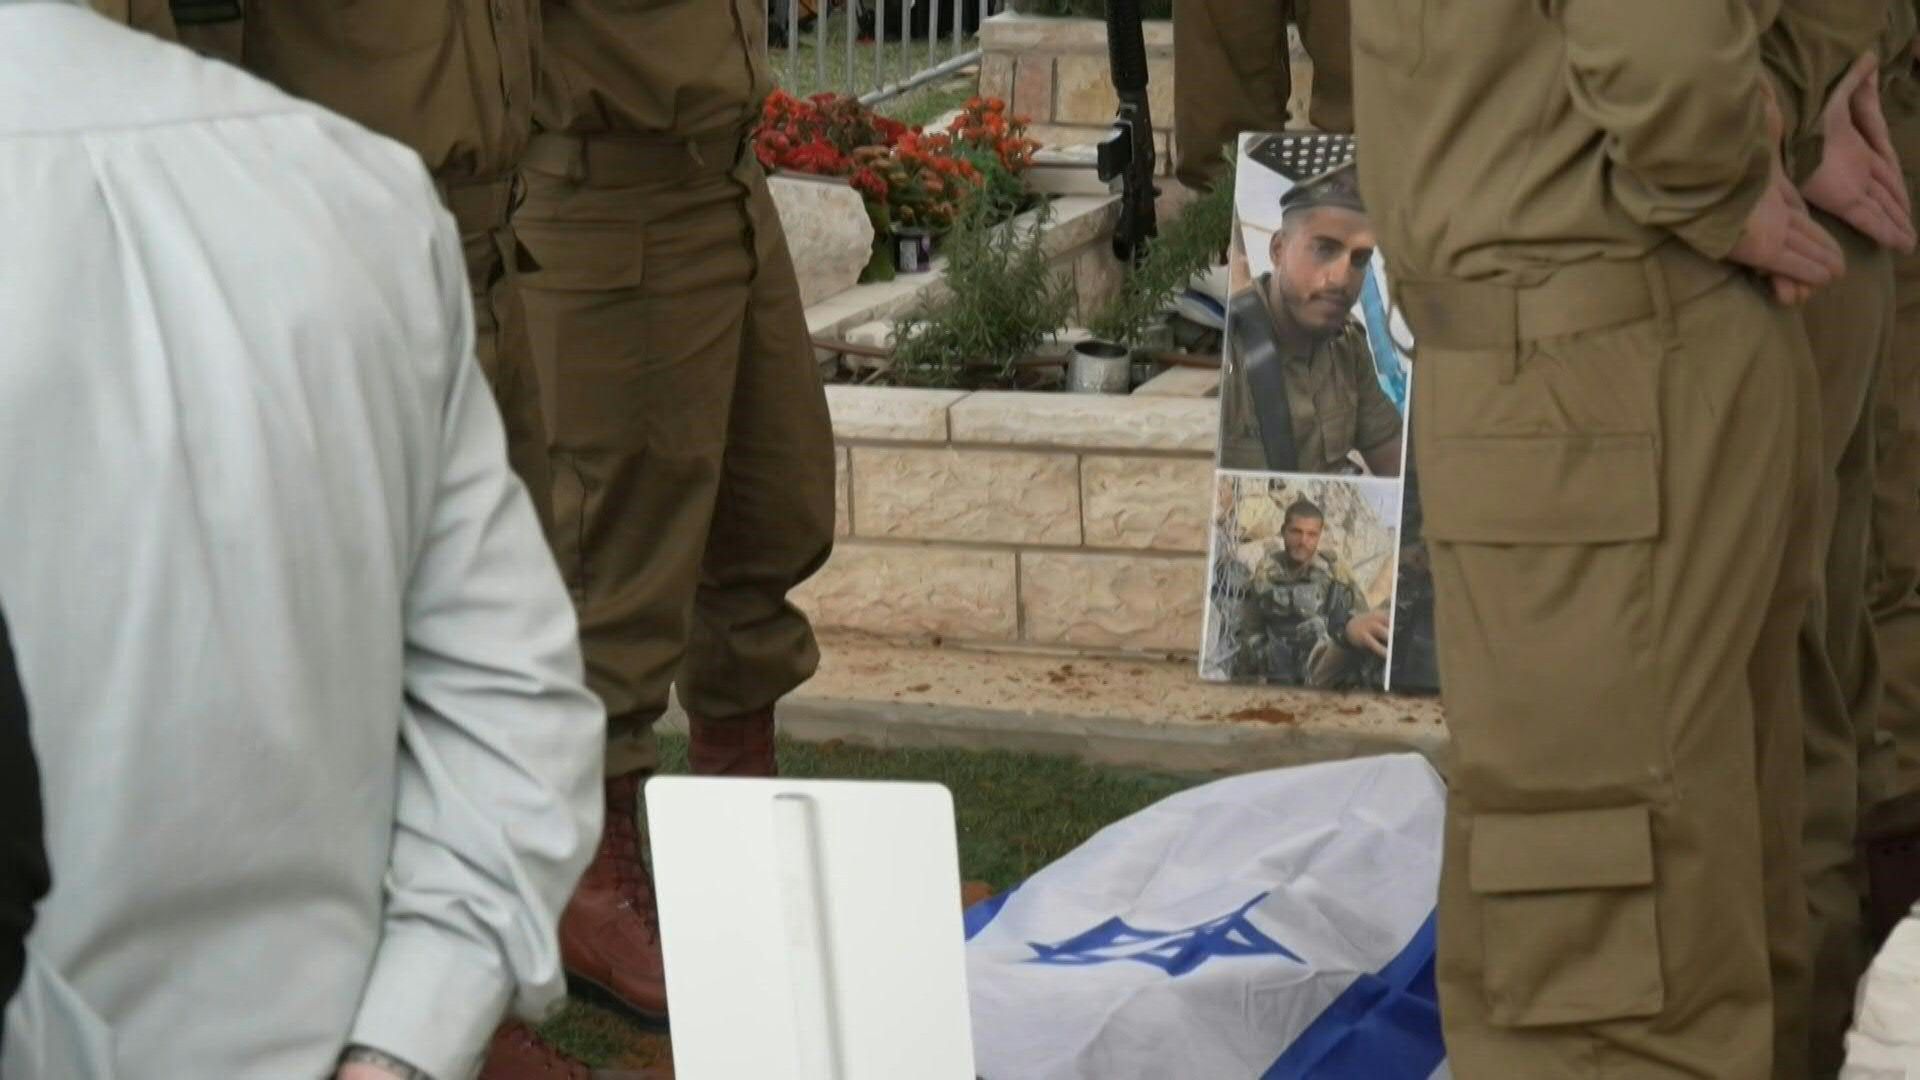 Israelis hold funeral for soldier killed in Gaza